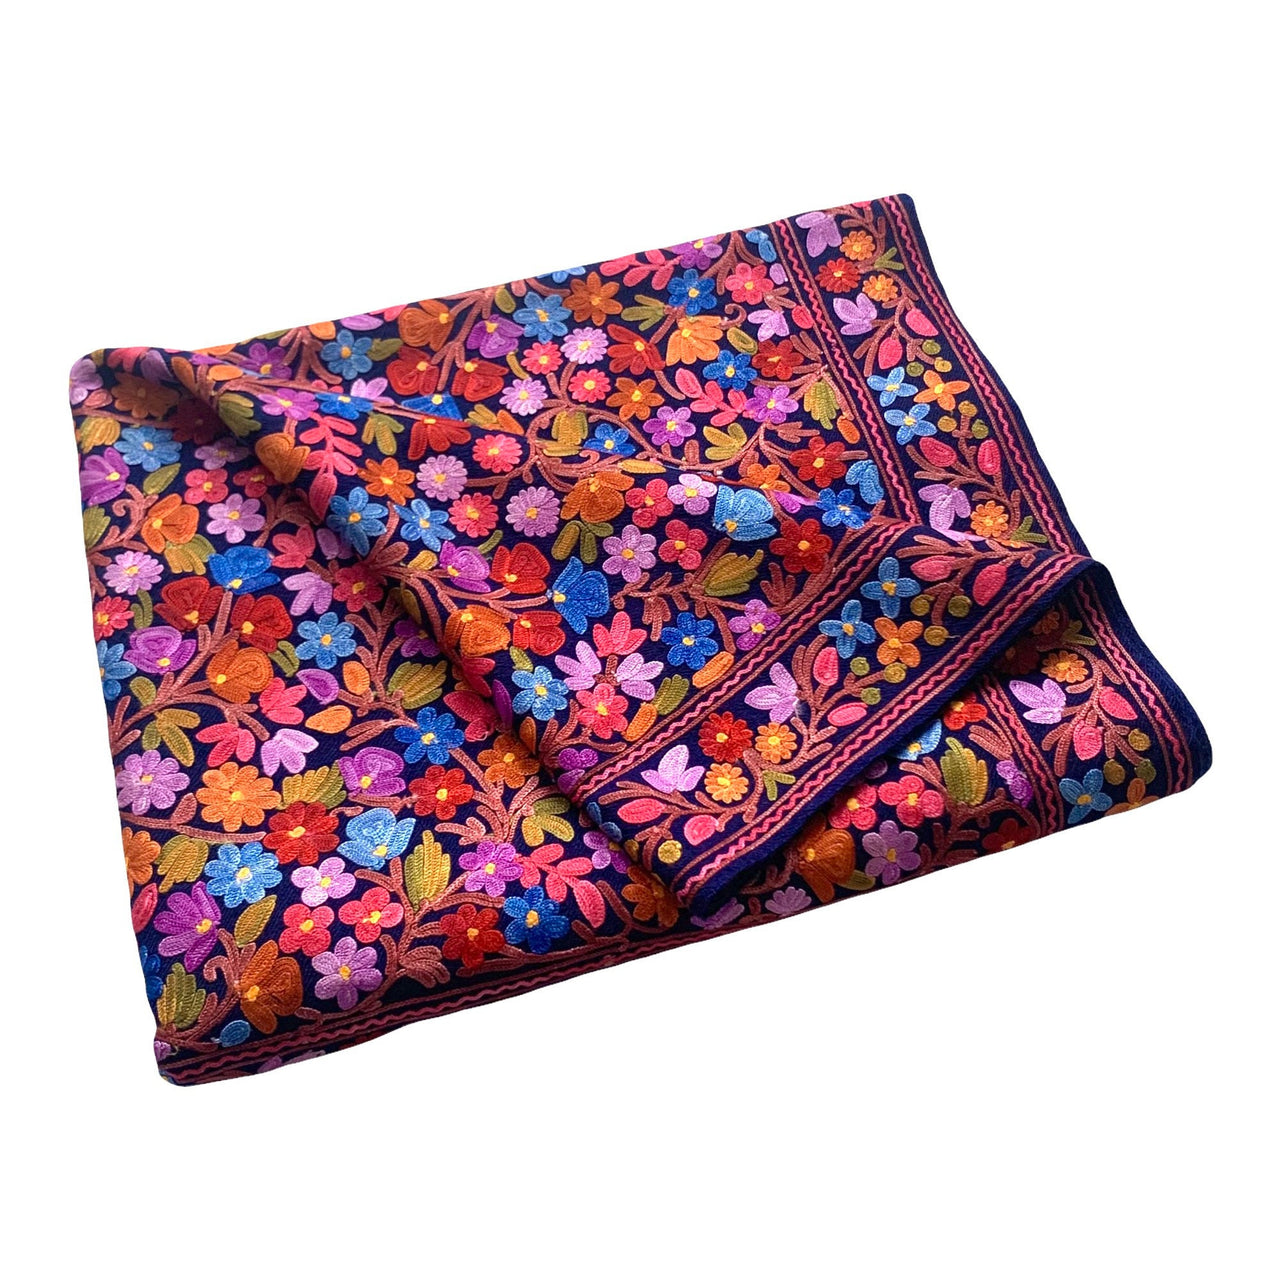 Navy Blue Floral Embroidered multicoloured Pashmina/Shawl/Scarf/Stole /Wrap